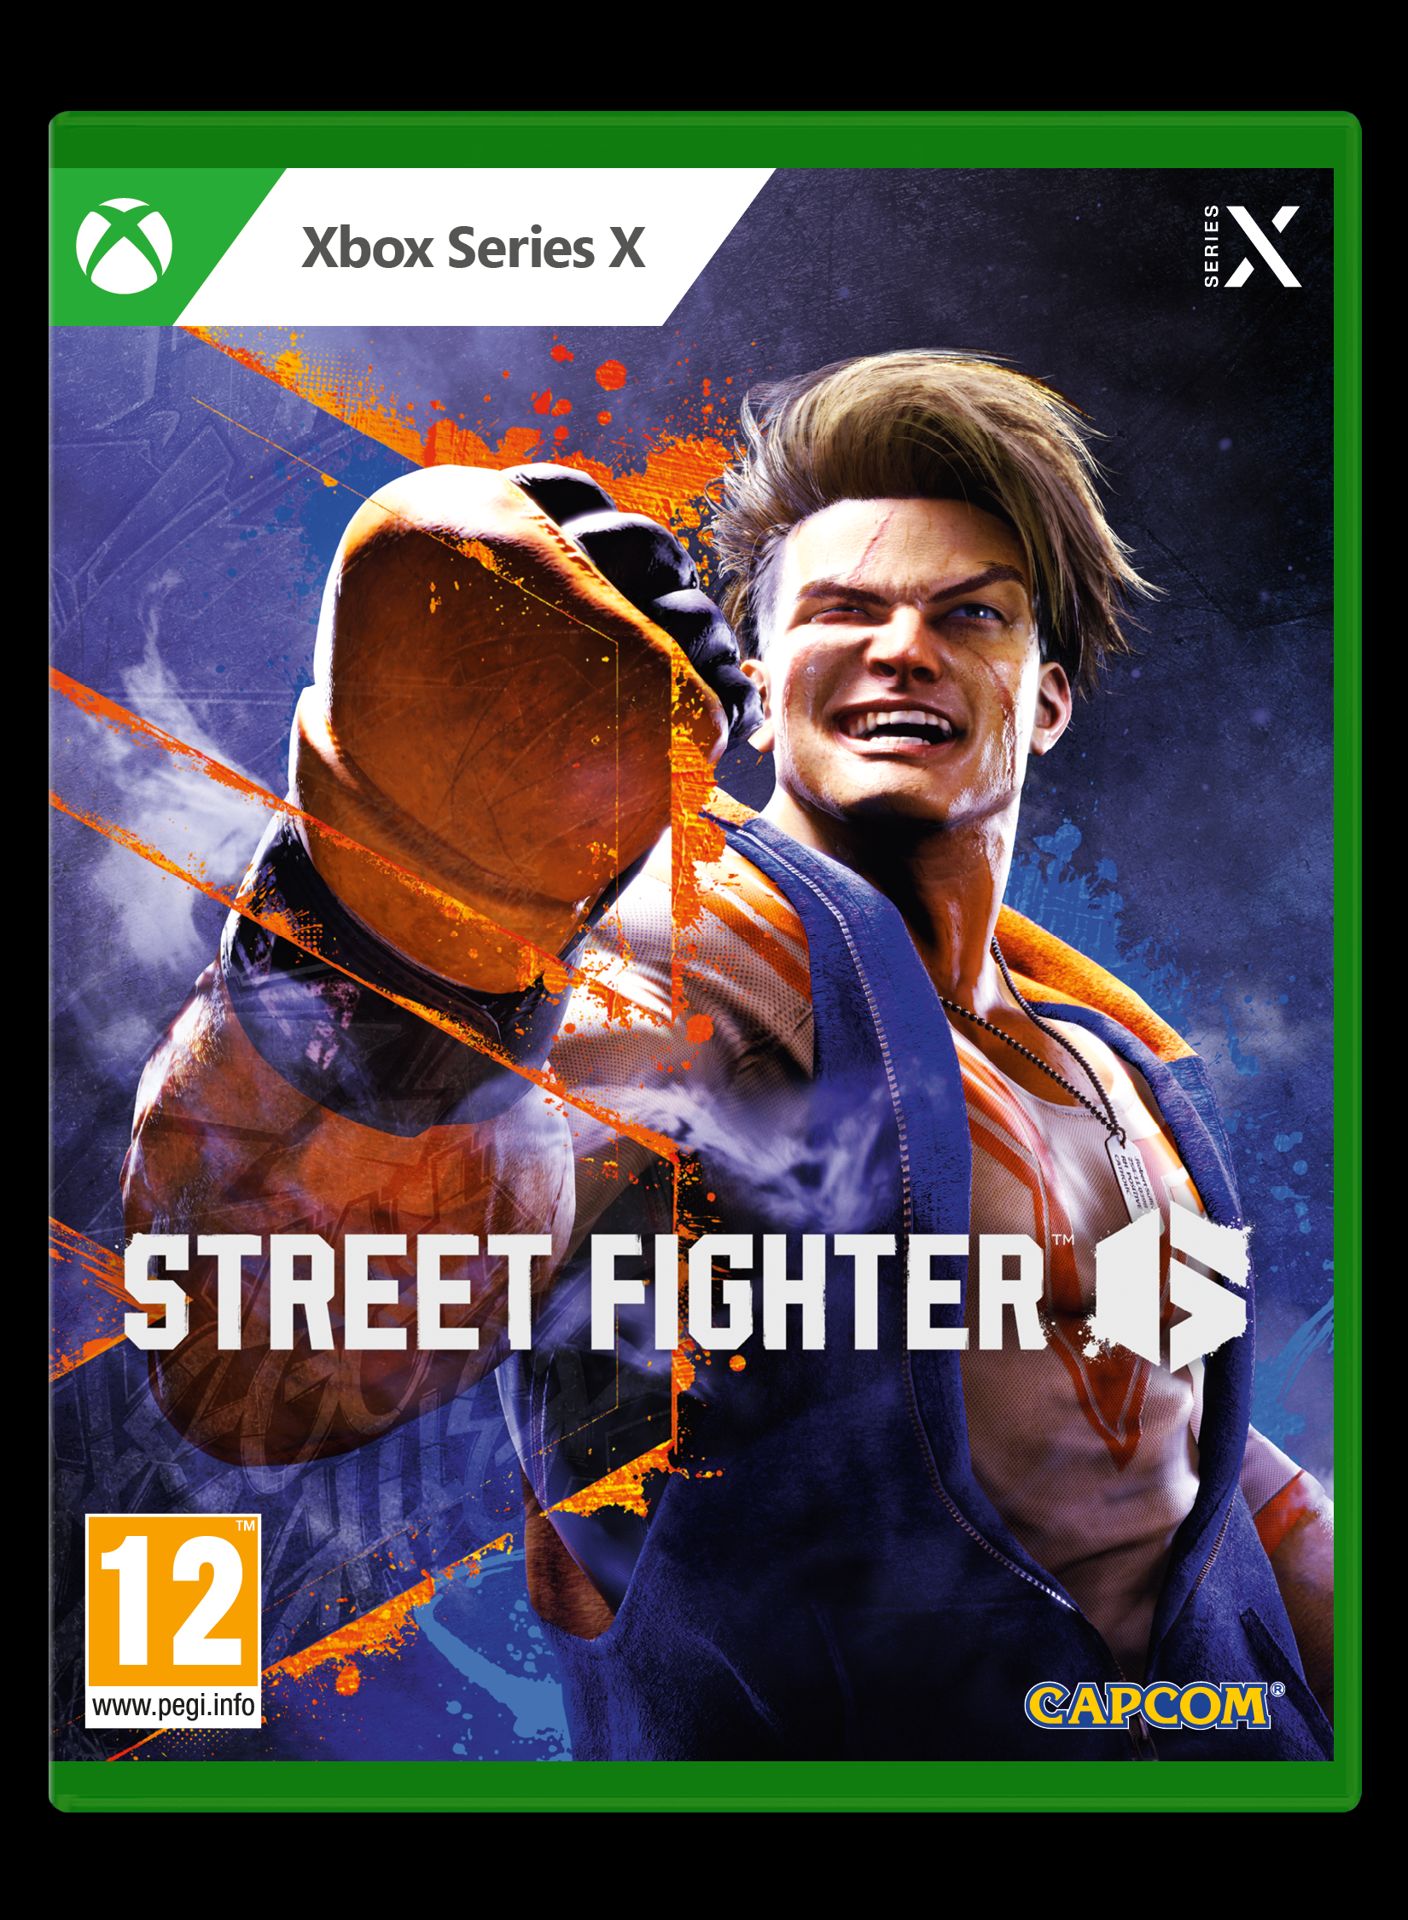 Street Fighter 6 pas cher - Jeu PS5, Xbox Series, PS4, PC